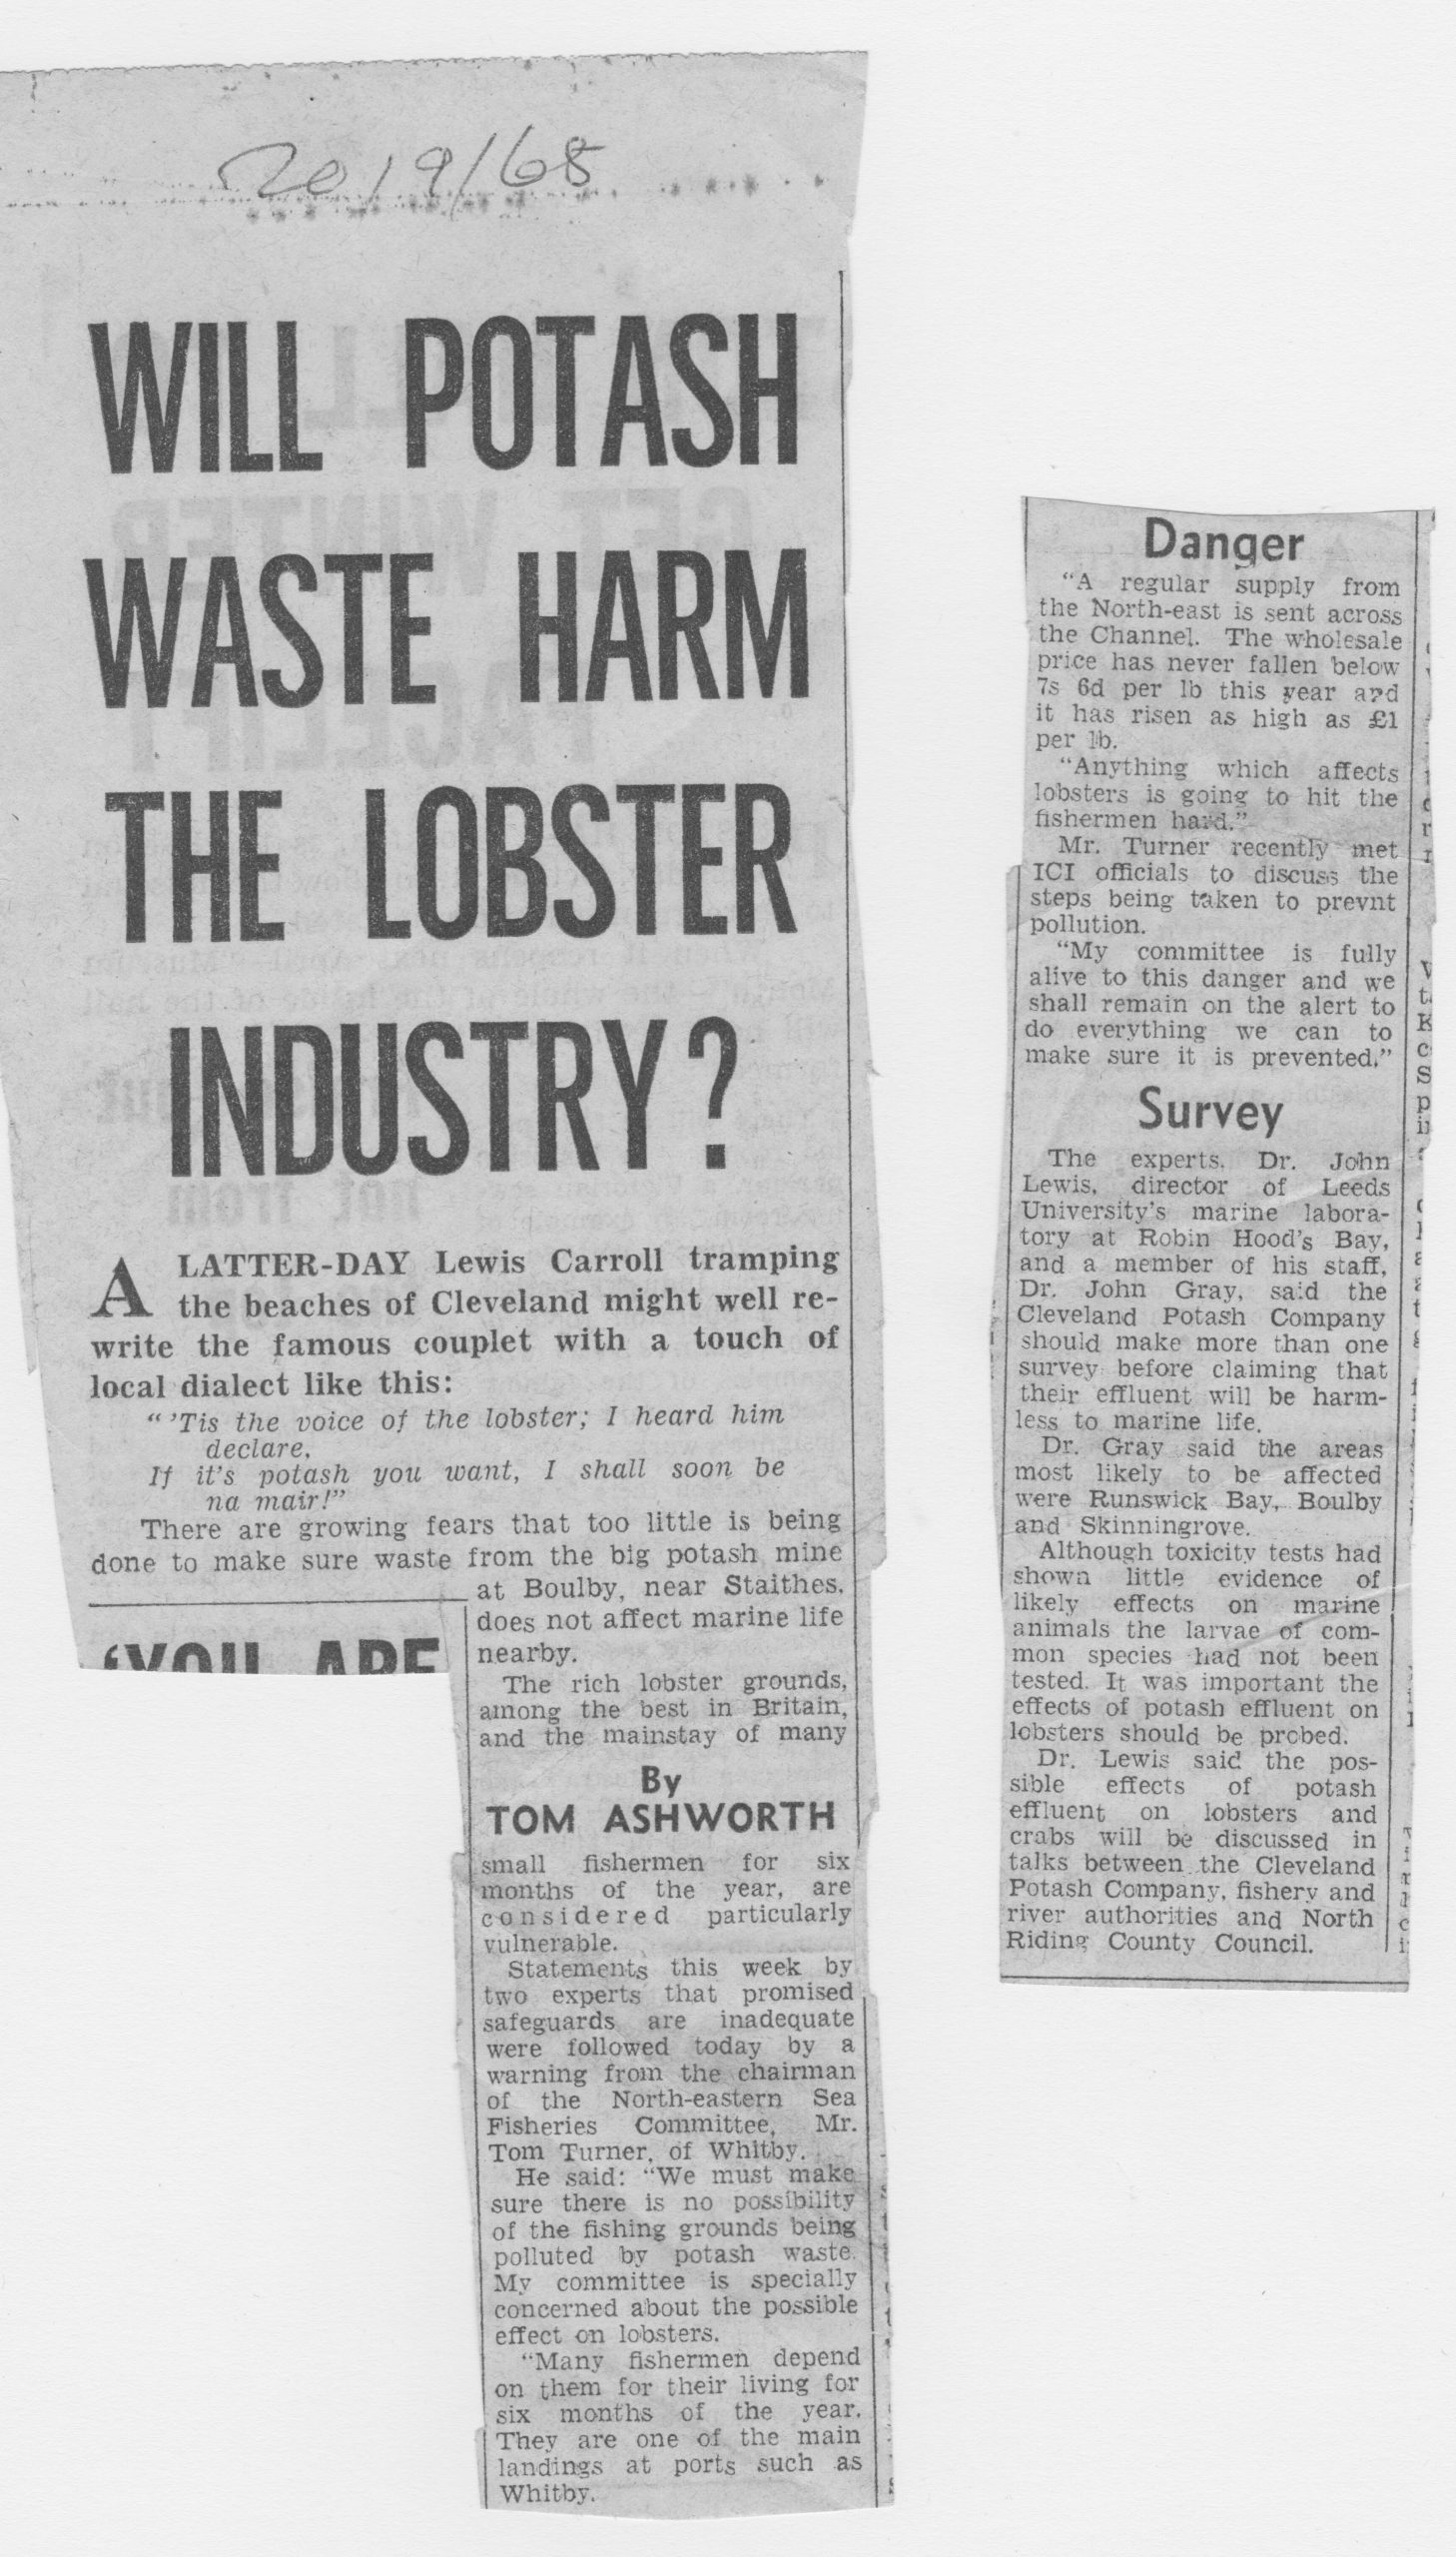 There are questions about the effect of potash waste on Yorkshire lobster fisheries